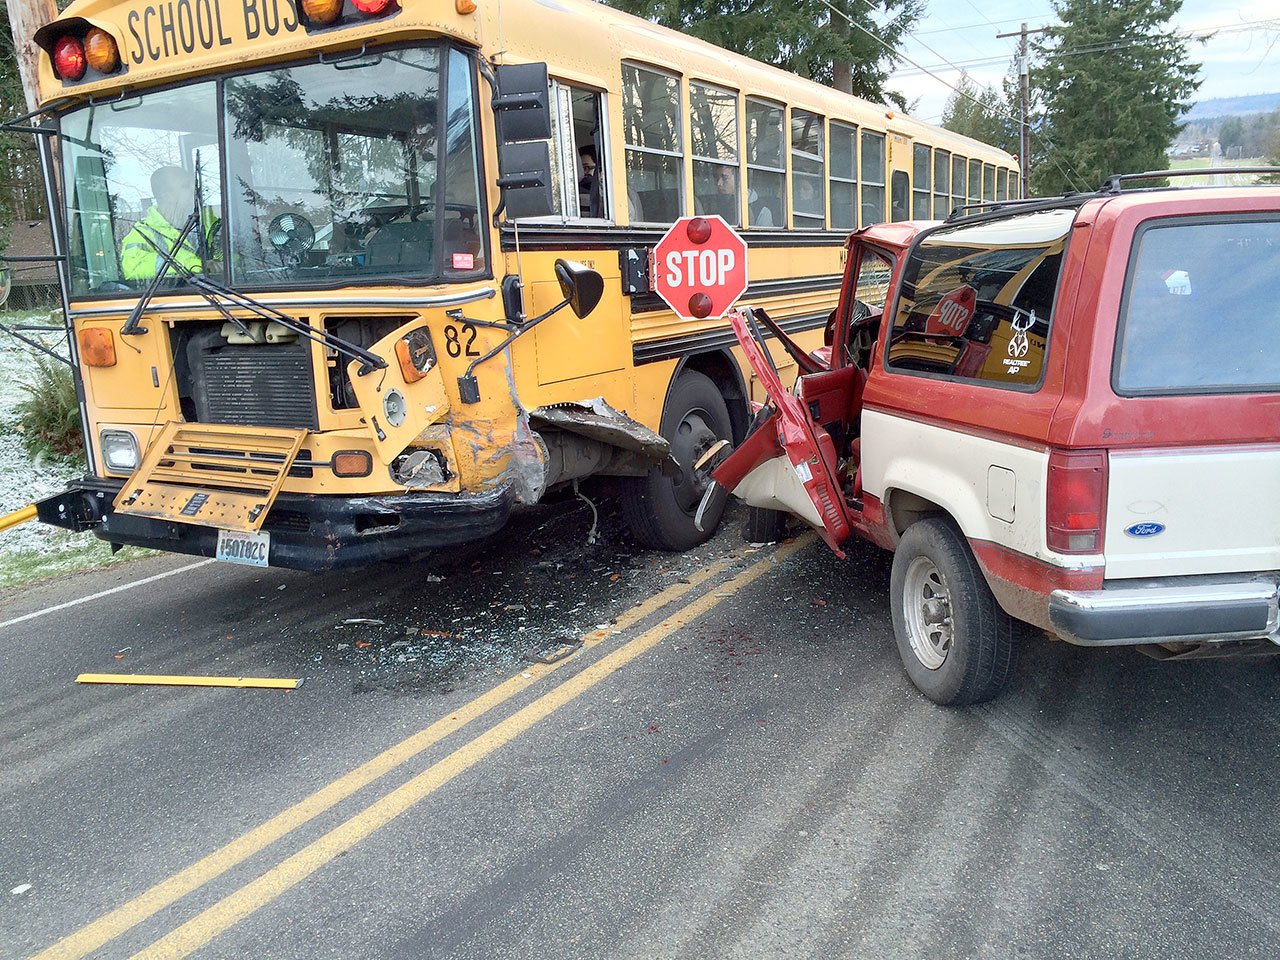 A driver is accused of hitting a school bus and then taking off near Marysville on Thursday afternoon. No children were injured. (Snohomish County Sheriff’s Office)